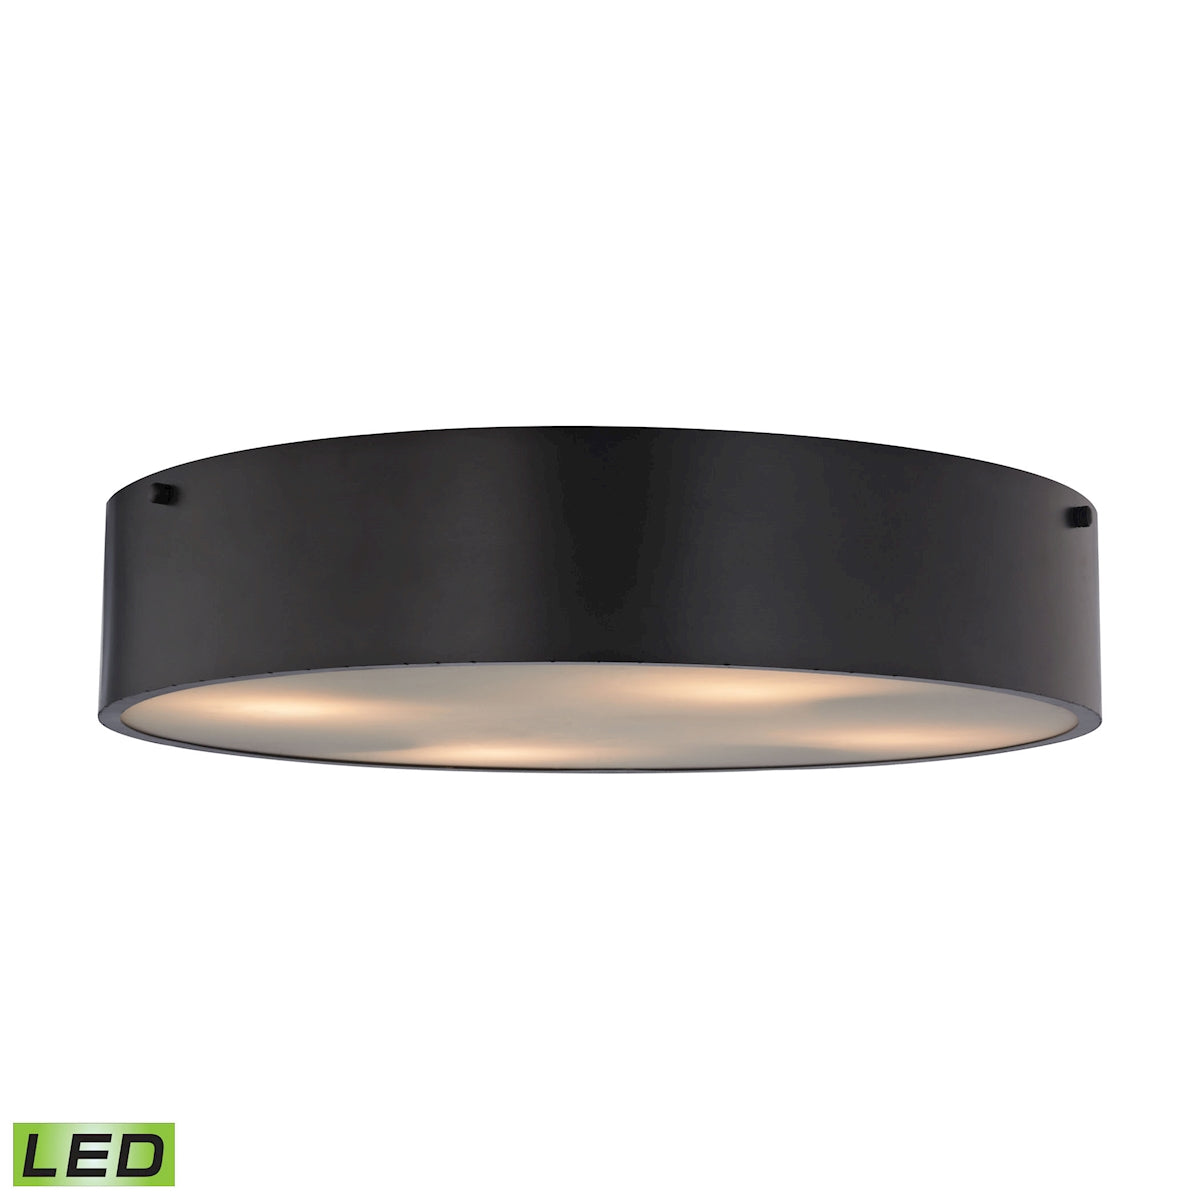 Clayton 4-Light Flush Mount in Oiled Bronze with Black Shade - Includes LED Bulbs